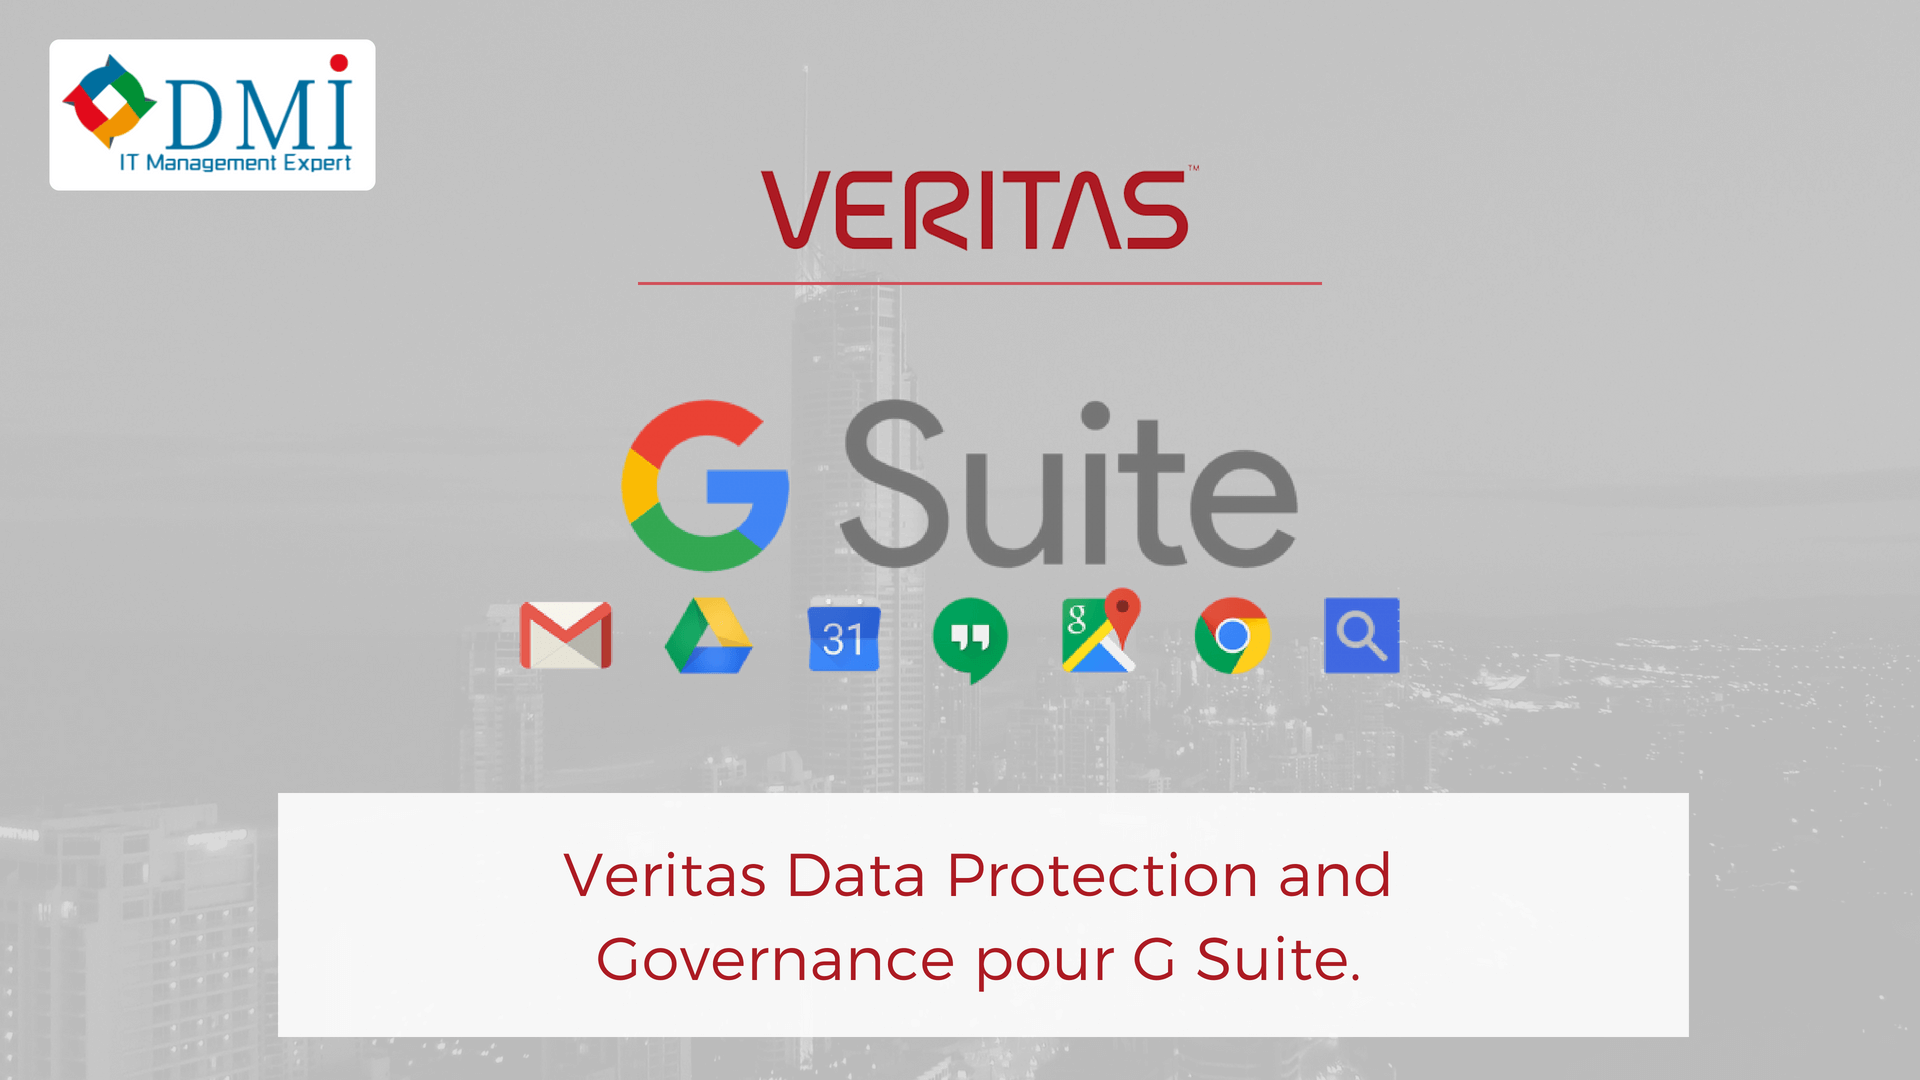 Veritas Data Protection and Governance pour G Suite